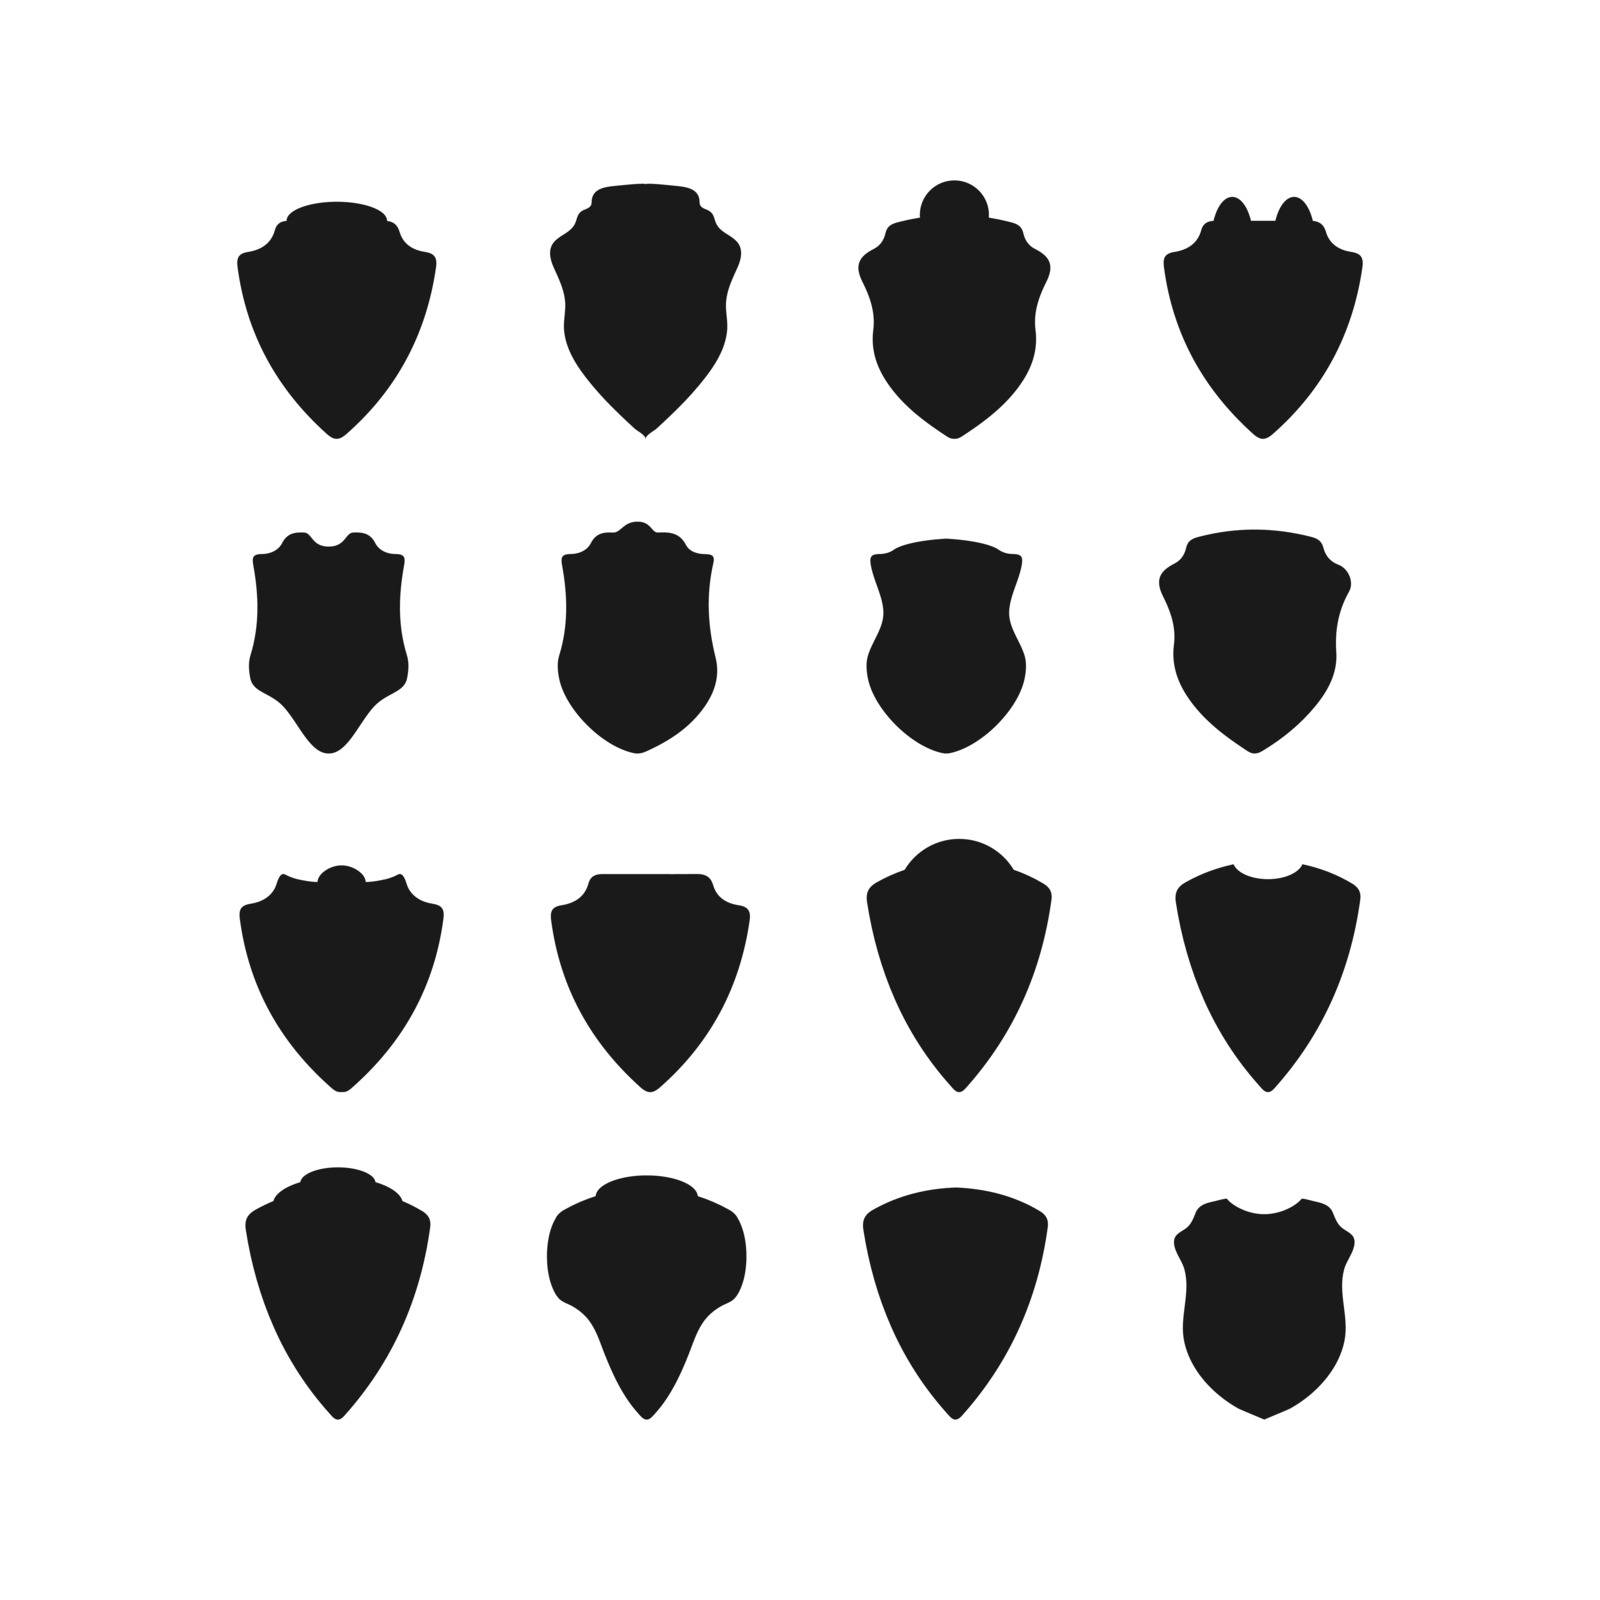 Medieval shield. Set of vector silhouettes of medieval shield. Flat design.